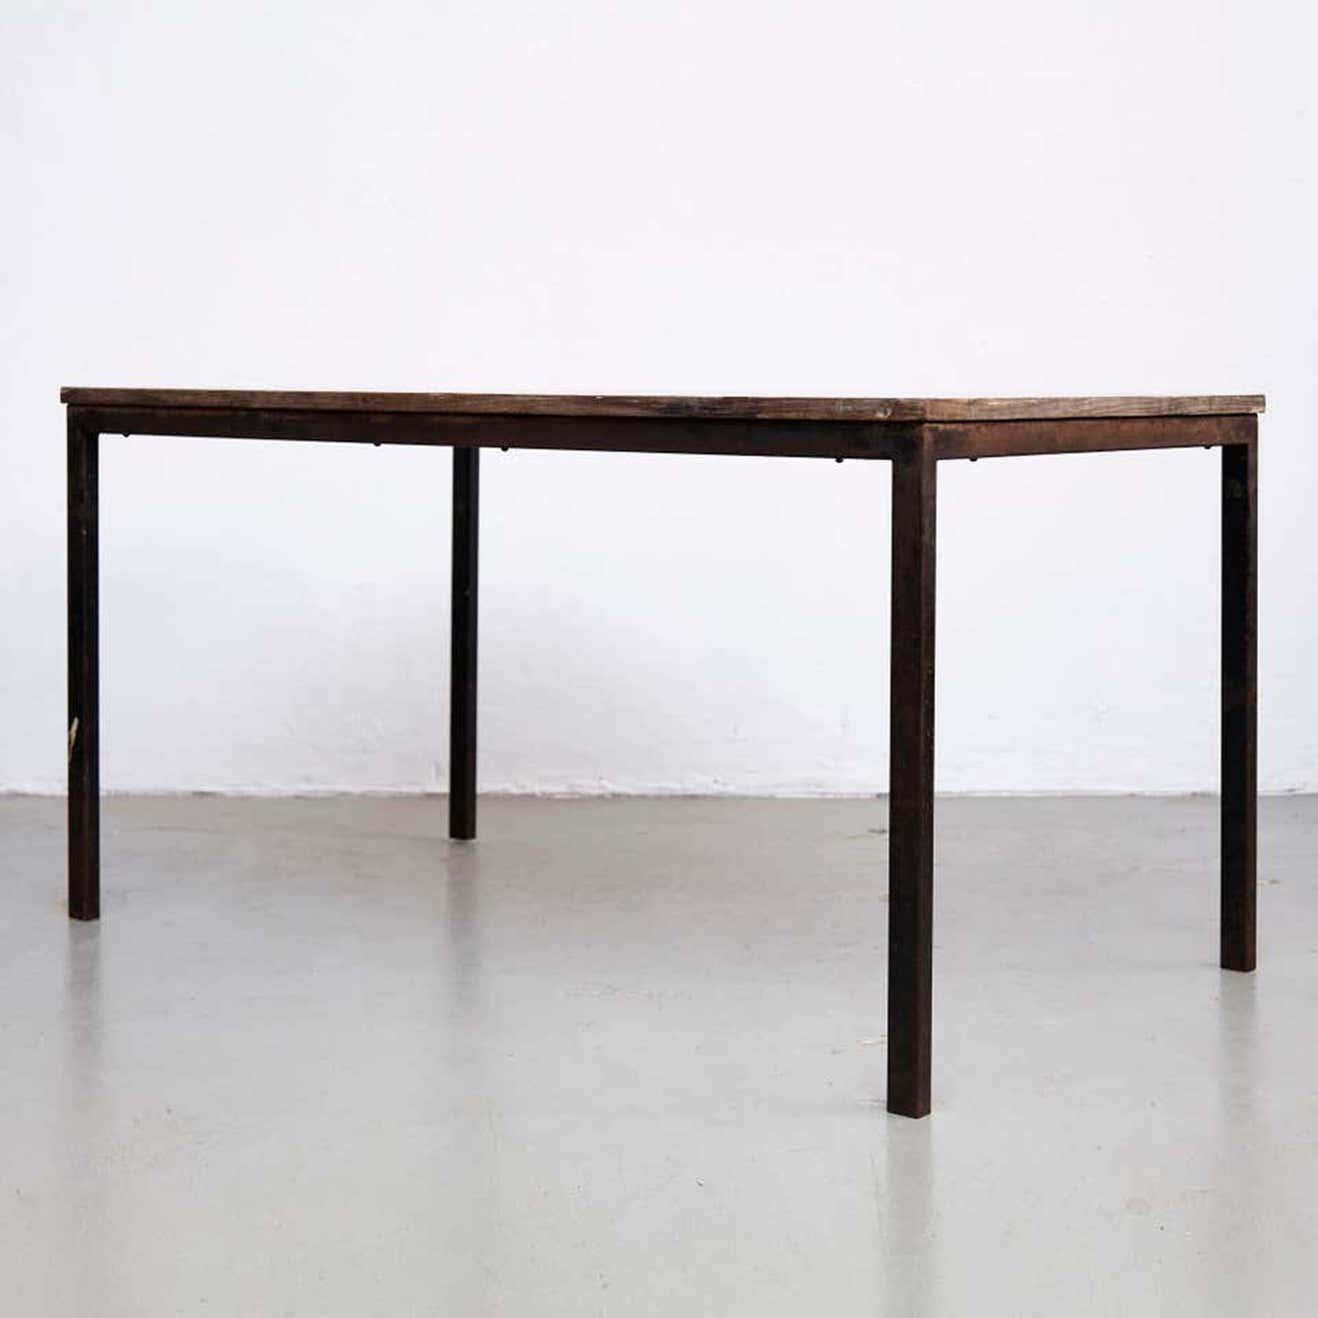 Charlotte Perriand, Mid-Century Modern, Wood Metal Cansado Table, circa 1950 In Good Condition For Sale In Barcelona, Barcelona